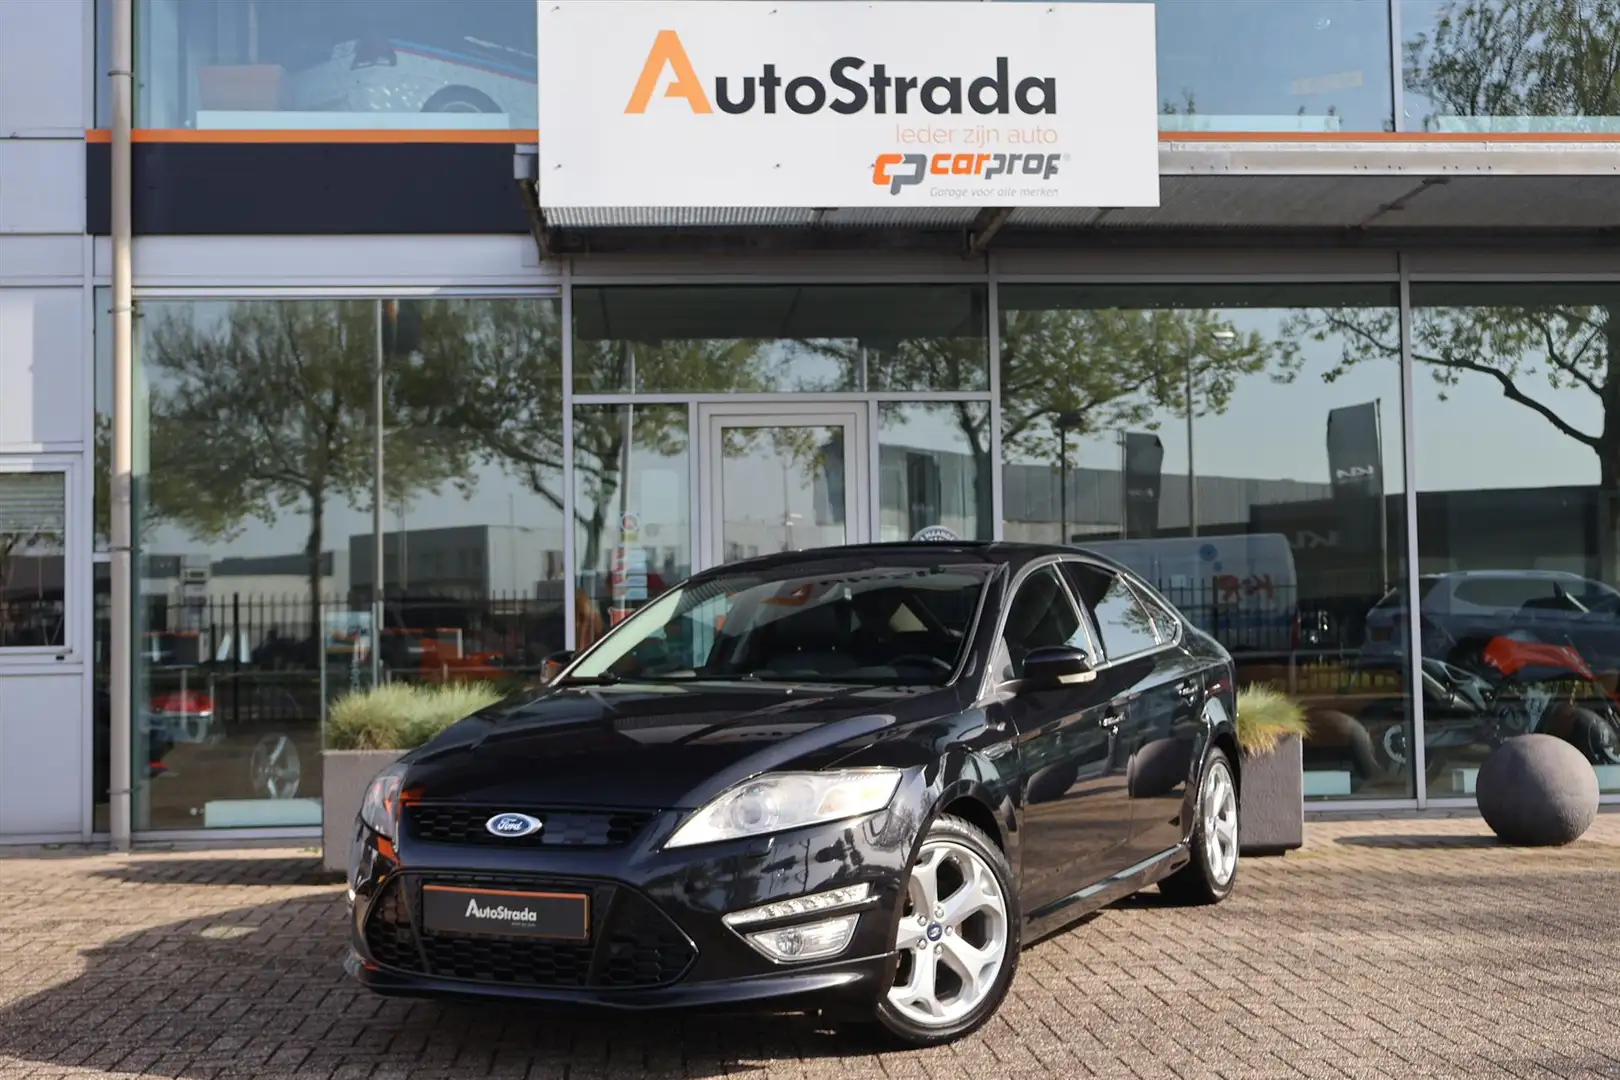 Ford Mondeo 2.0 S-EDITION PS6 5D 239PK | Pano | Memory stoelen crna - 2